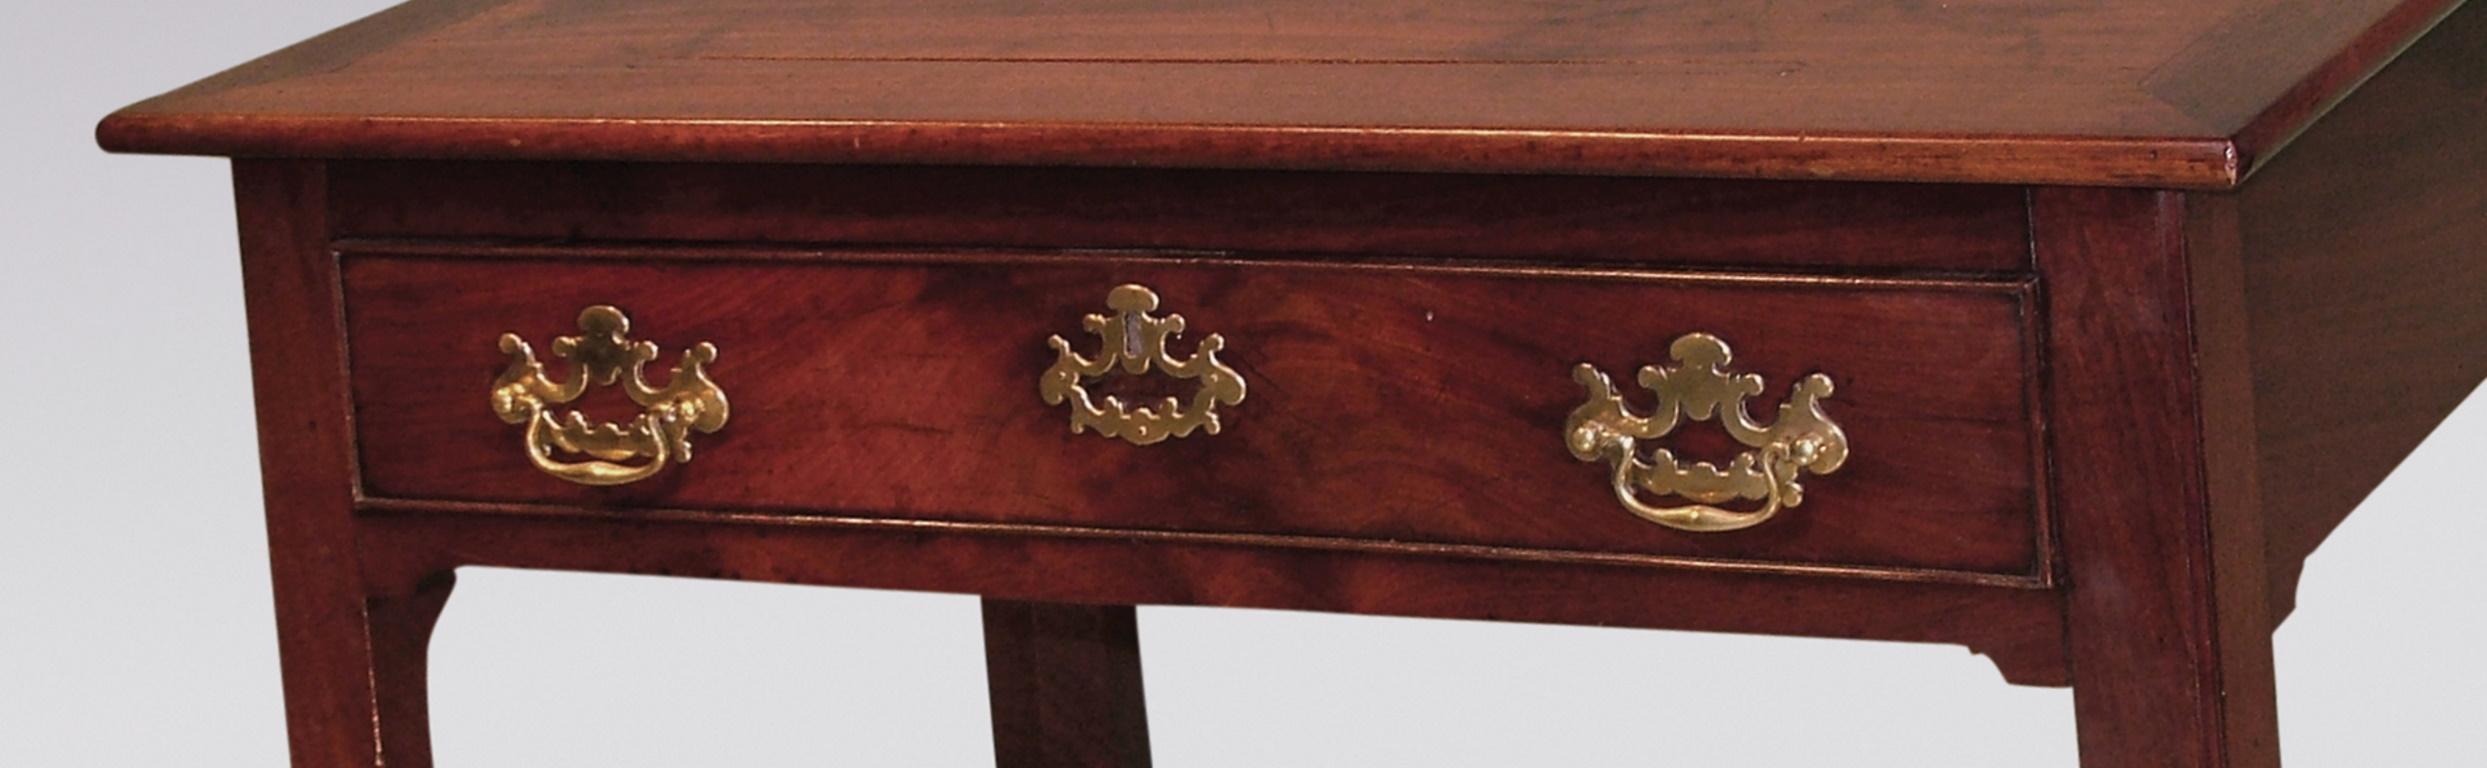 Polished Mid-18th Century Chippendale Period Mahogany Architects Table For Sale